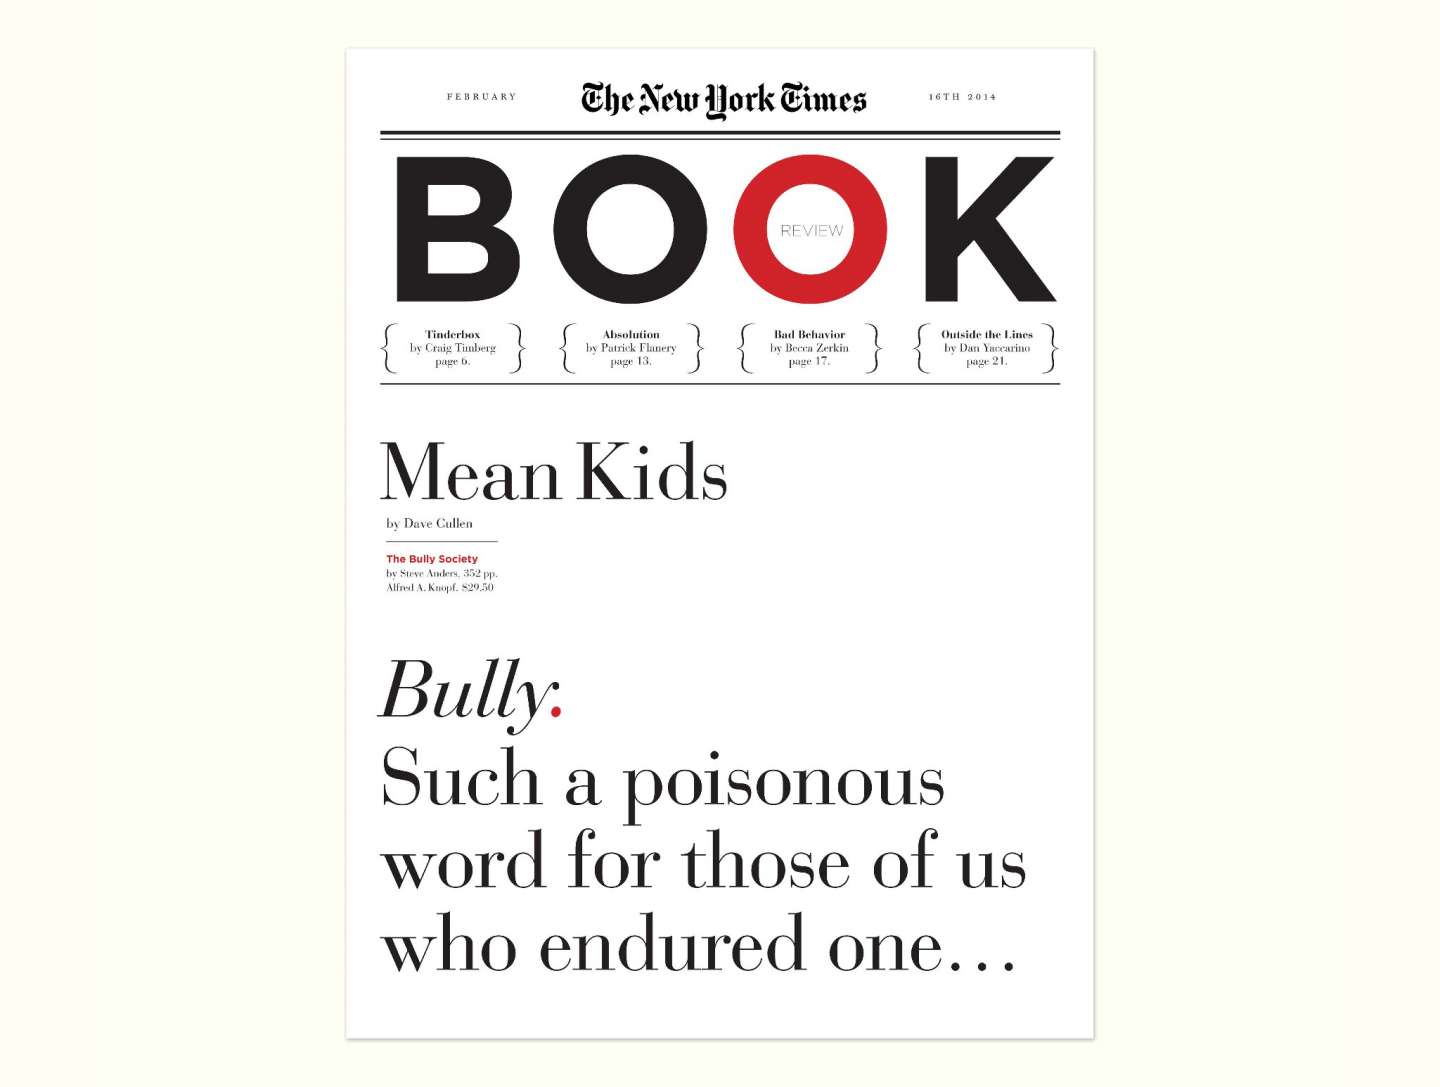 NYT Book Review Redesign